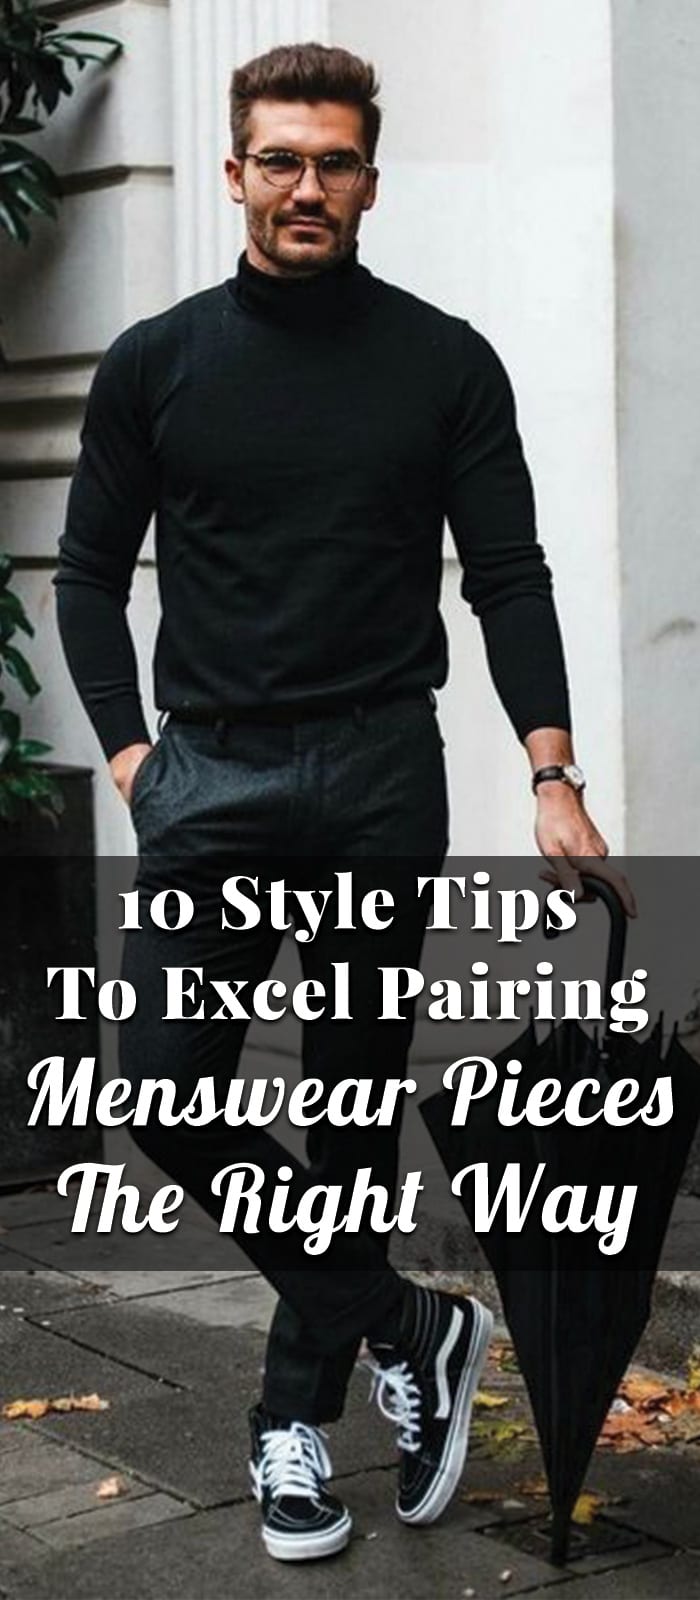 10 Style Tips To Excel Pairing Menswear Pieces The Right Way